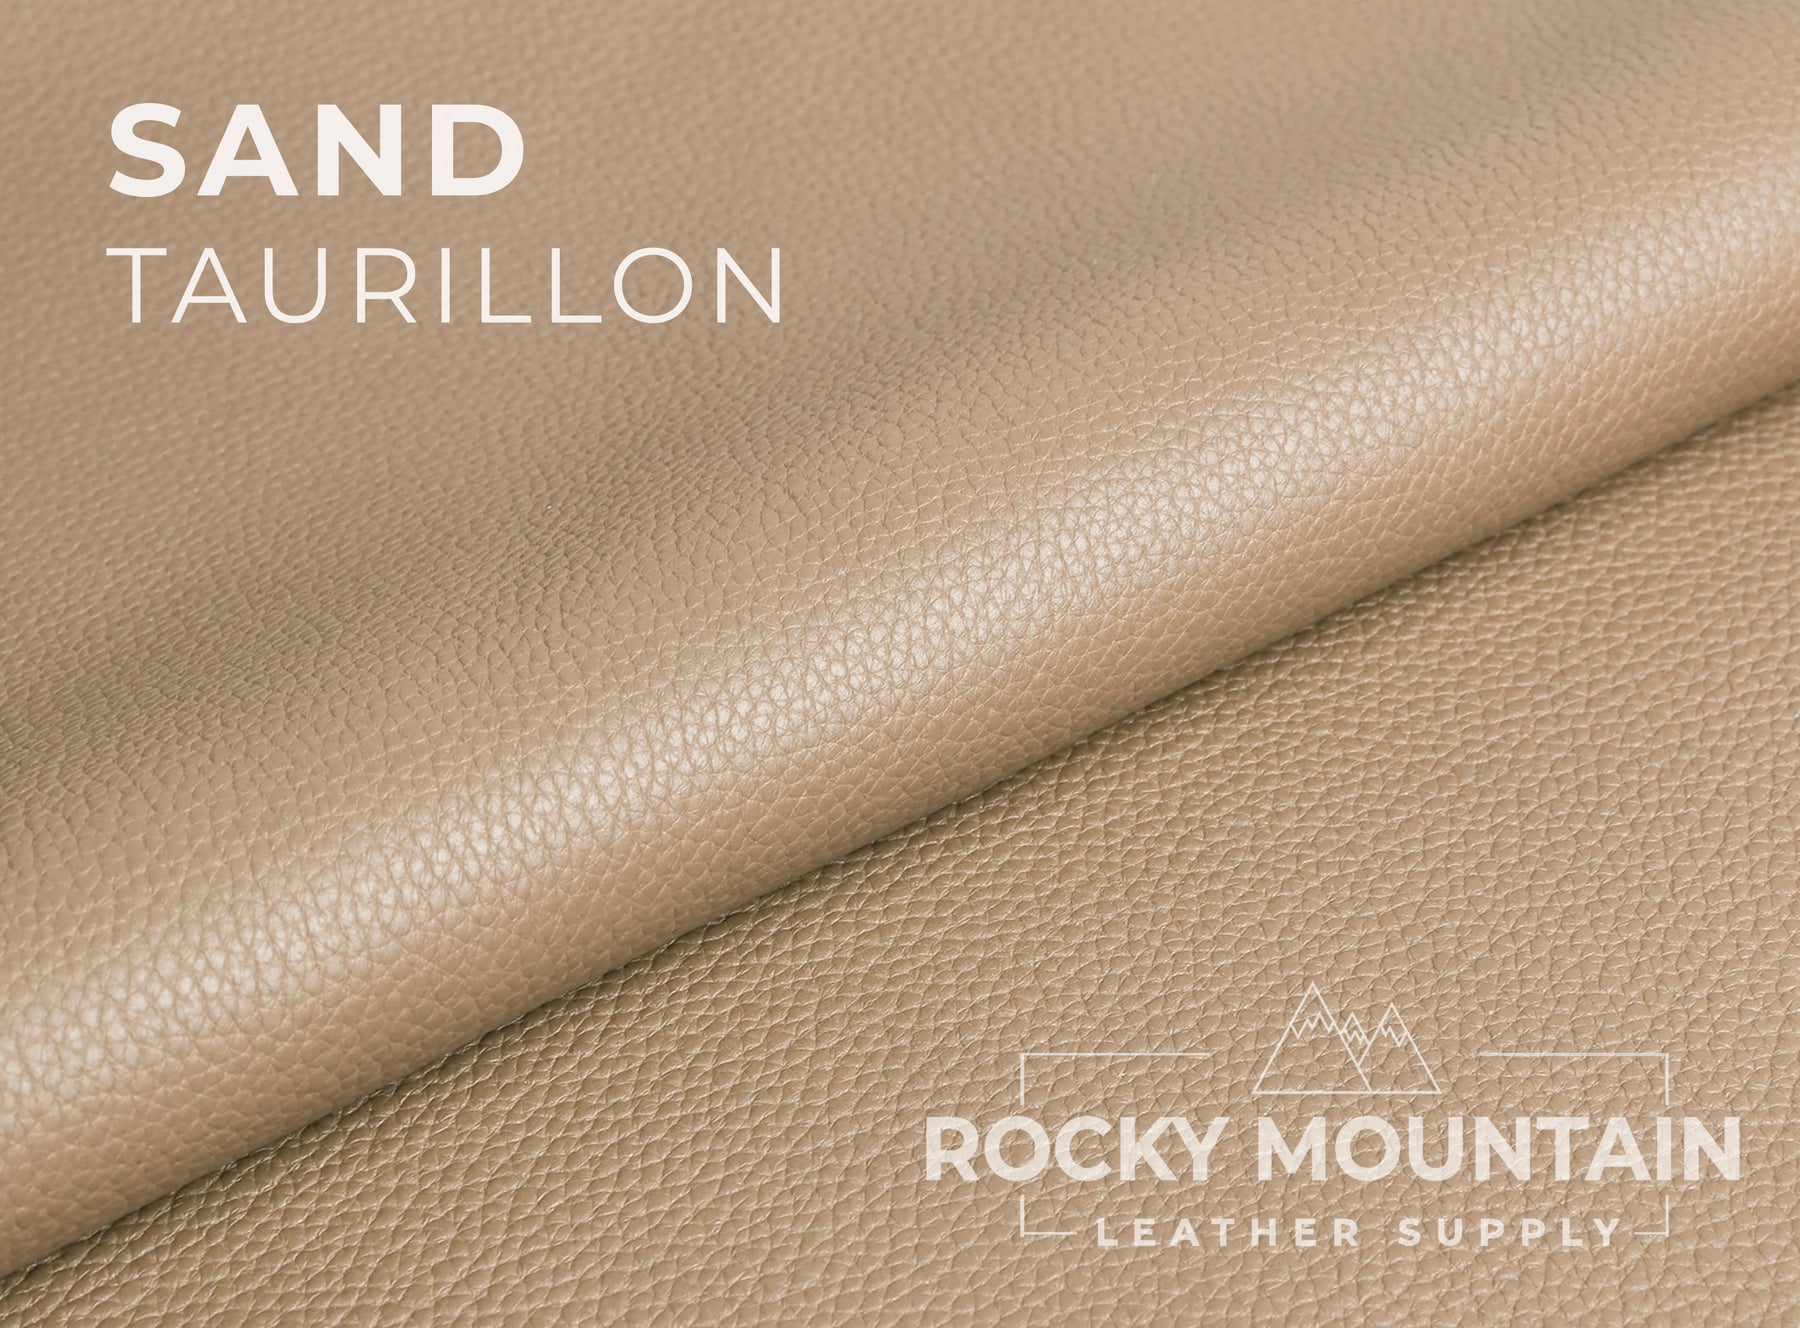 Taurillon 🇪🇺 -  Luxury Handbag "Large Pebbled" Young Bull Leather (SAMPLES)